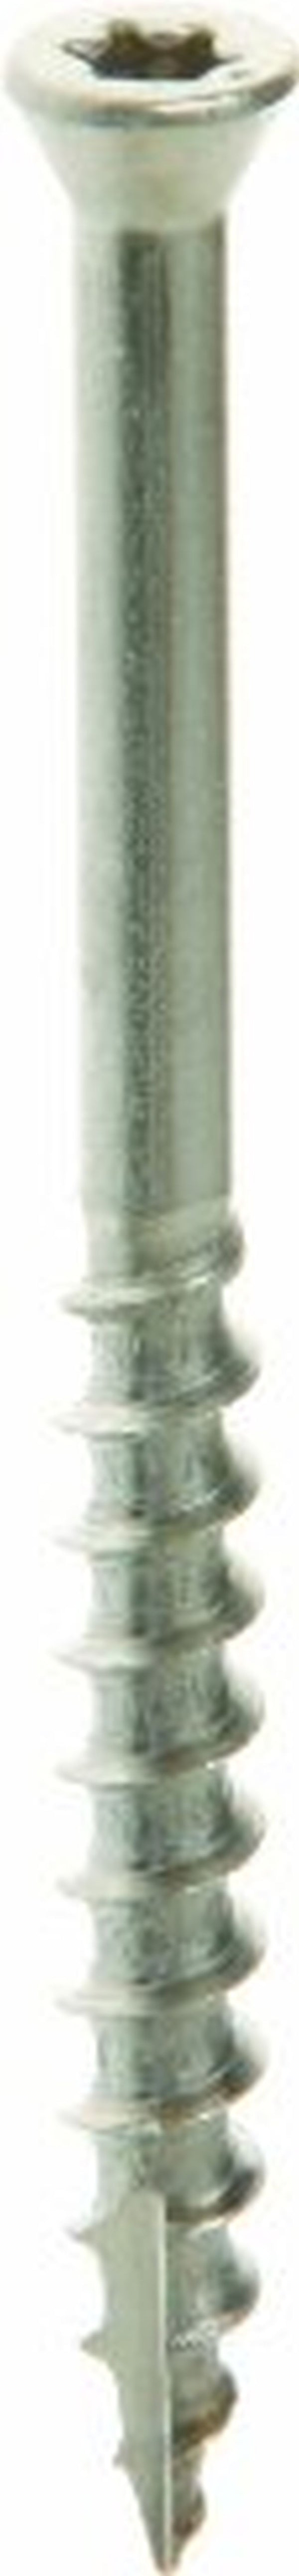 Grip Rite MAXS158THW3051 #10 x 2-1/2 in. x Stainless Steel Deck Screw (1 lb.Pack)